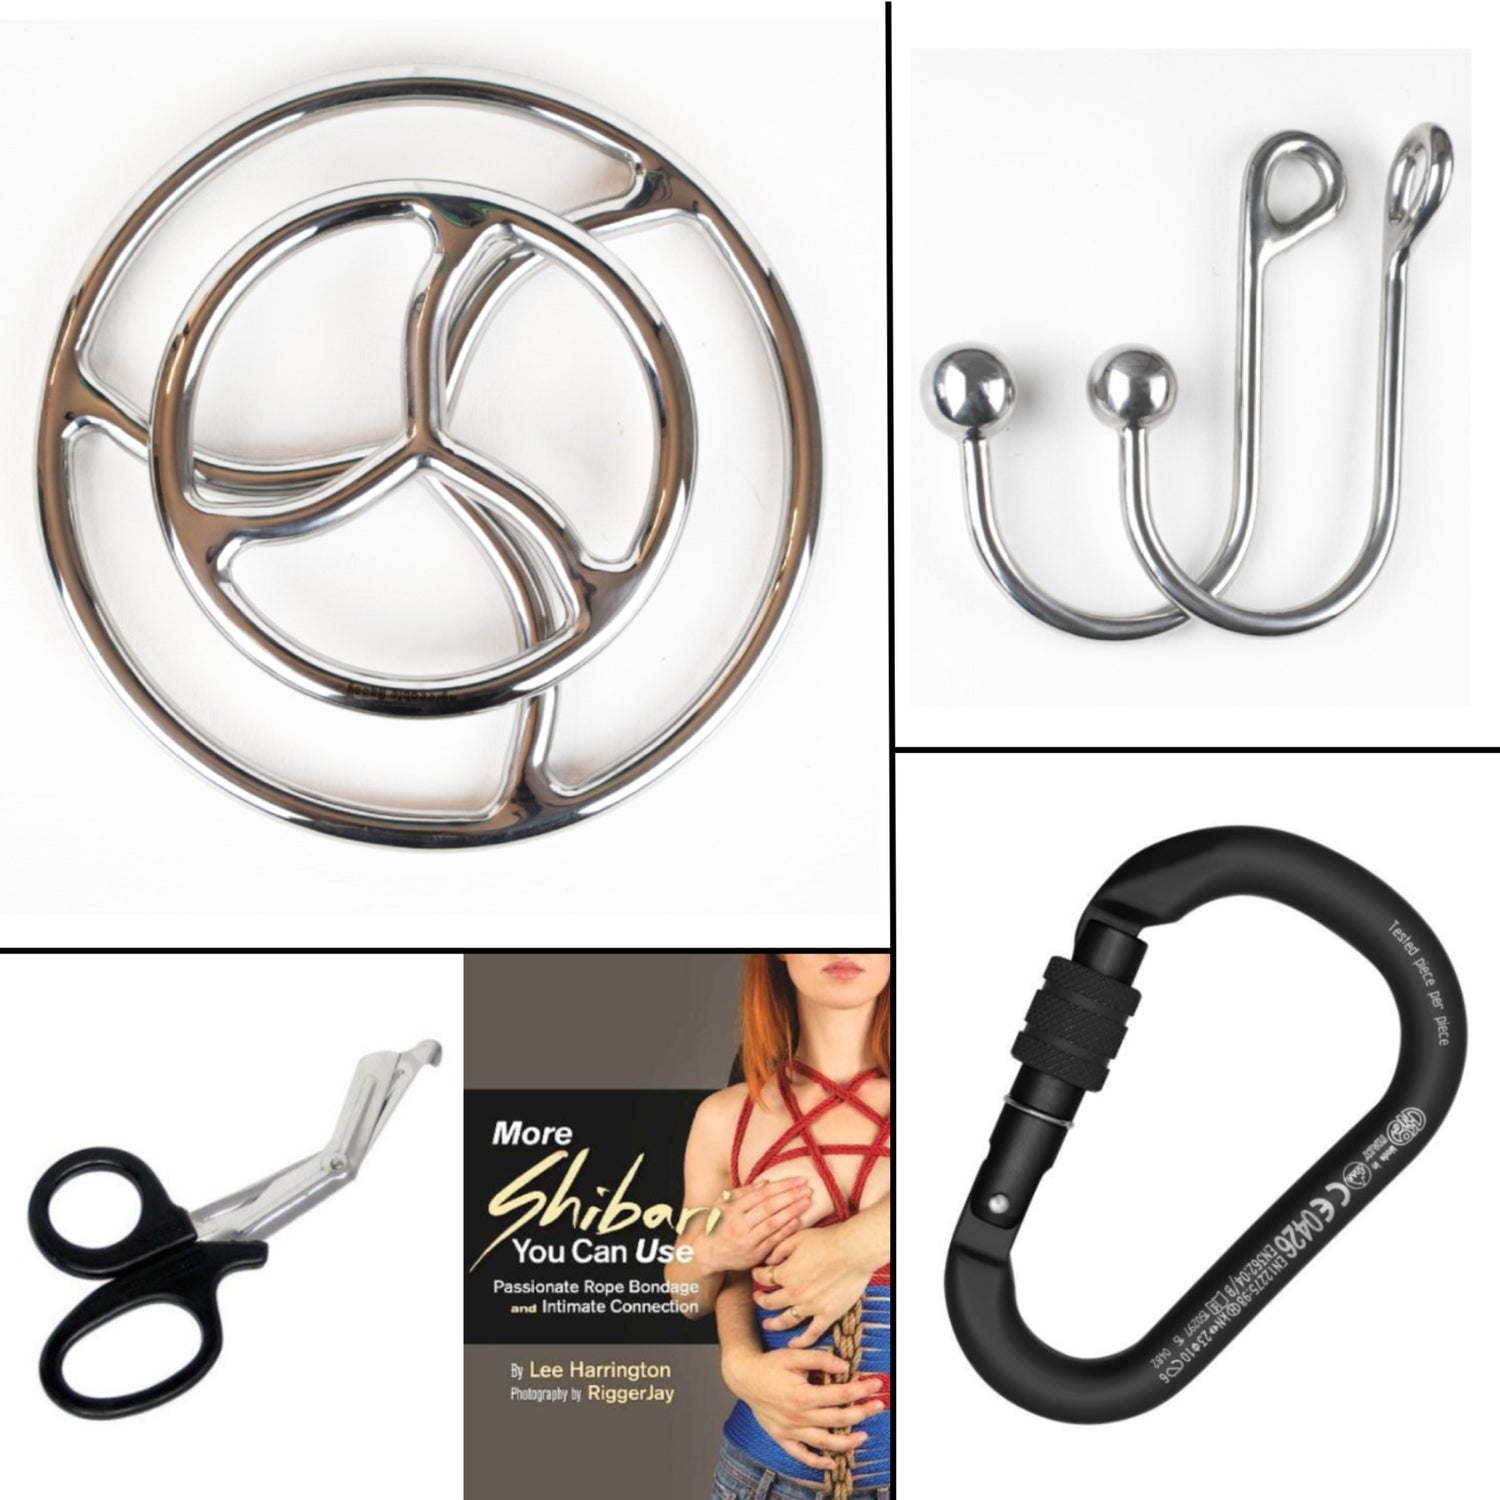 A photo collage of various kink accessories including: a book, rope shears, a carabiner, suspension hooks, and anal hooks.